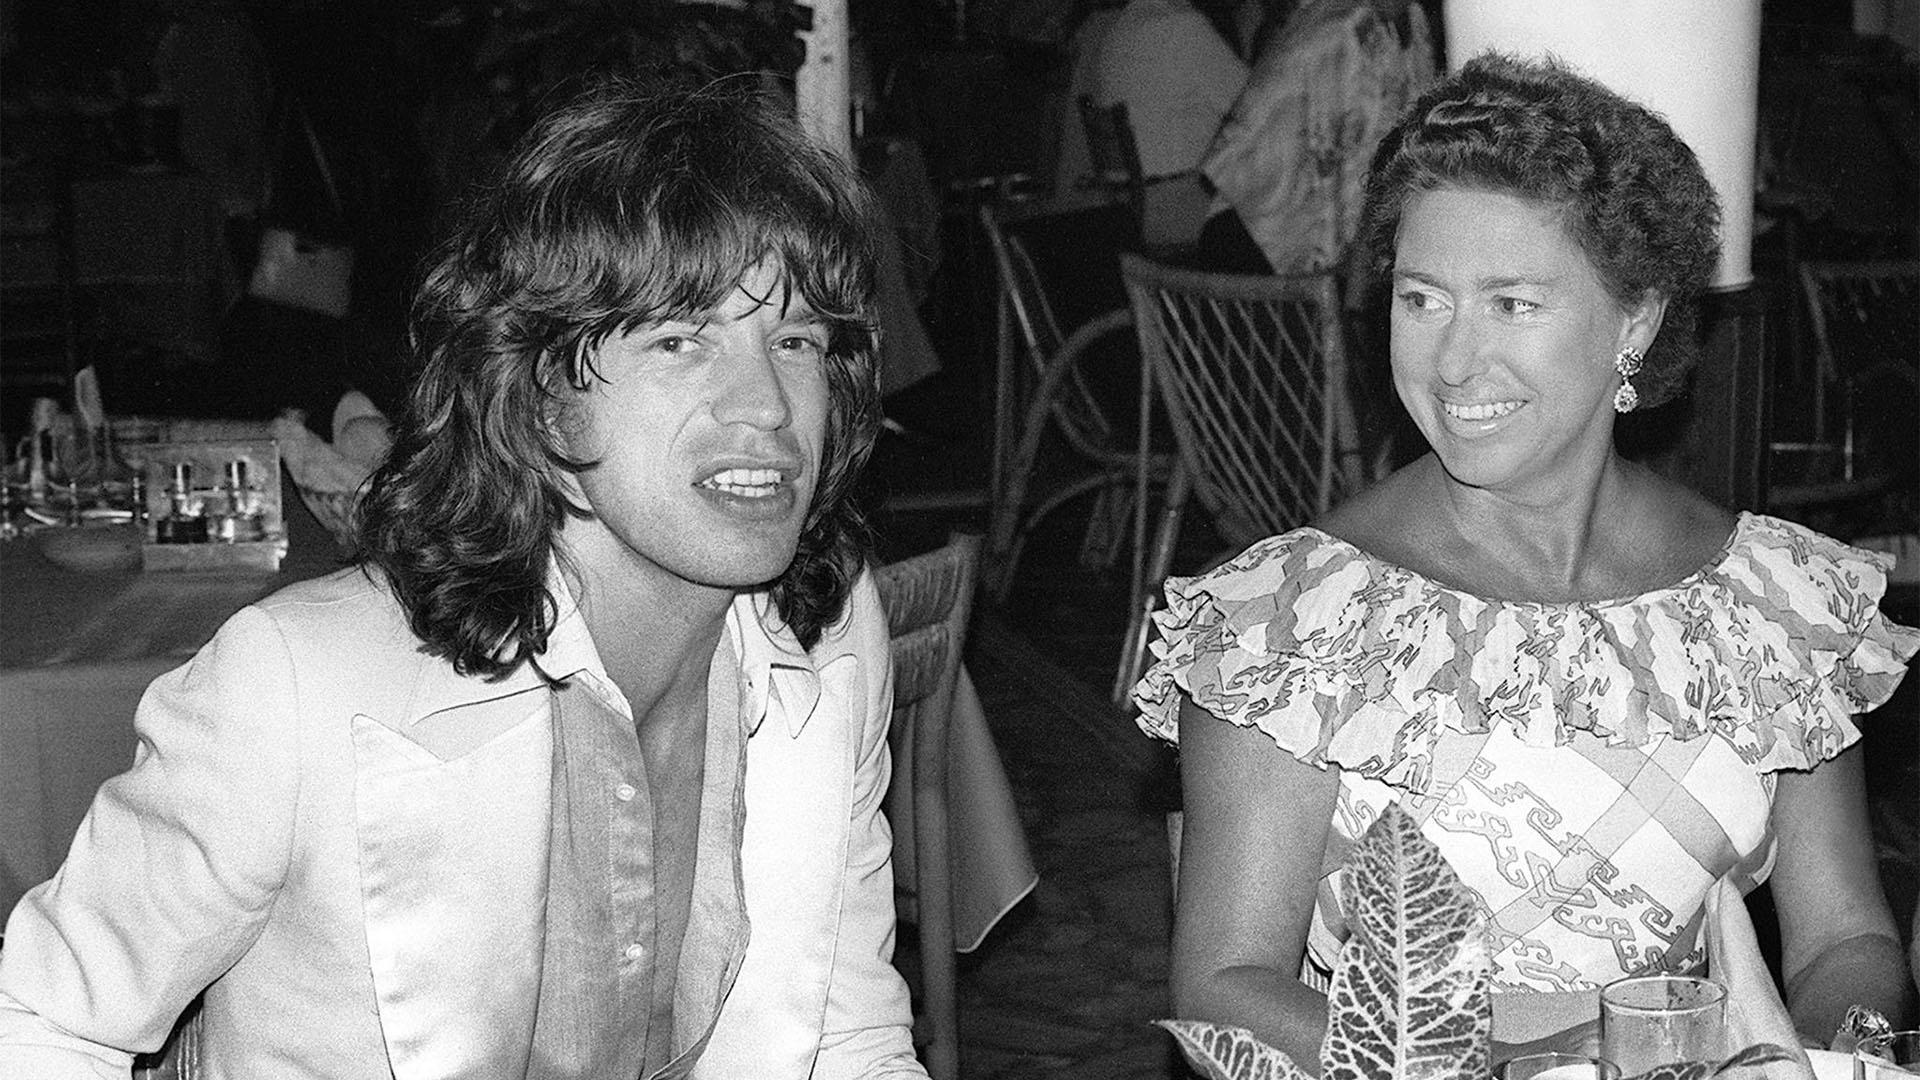 Princess Margaret and Mick Jagger in a bar on the island of Mustique.